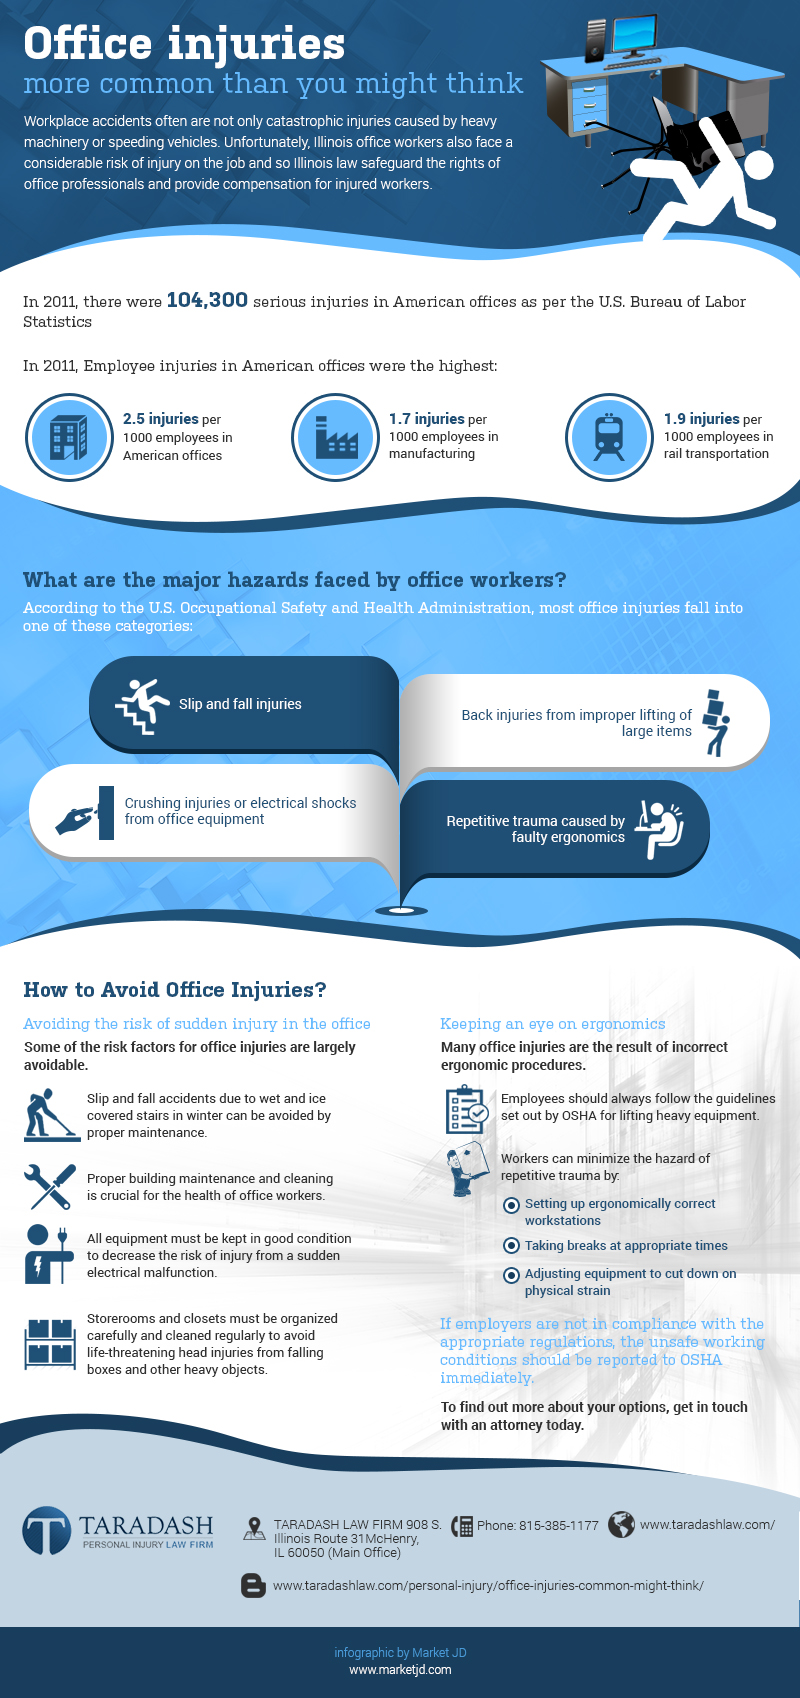 Office injuries